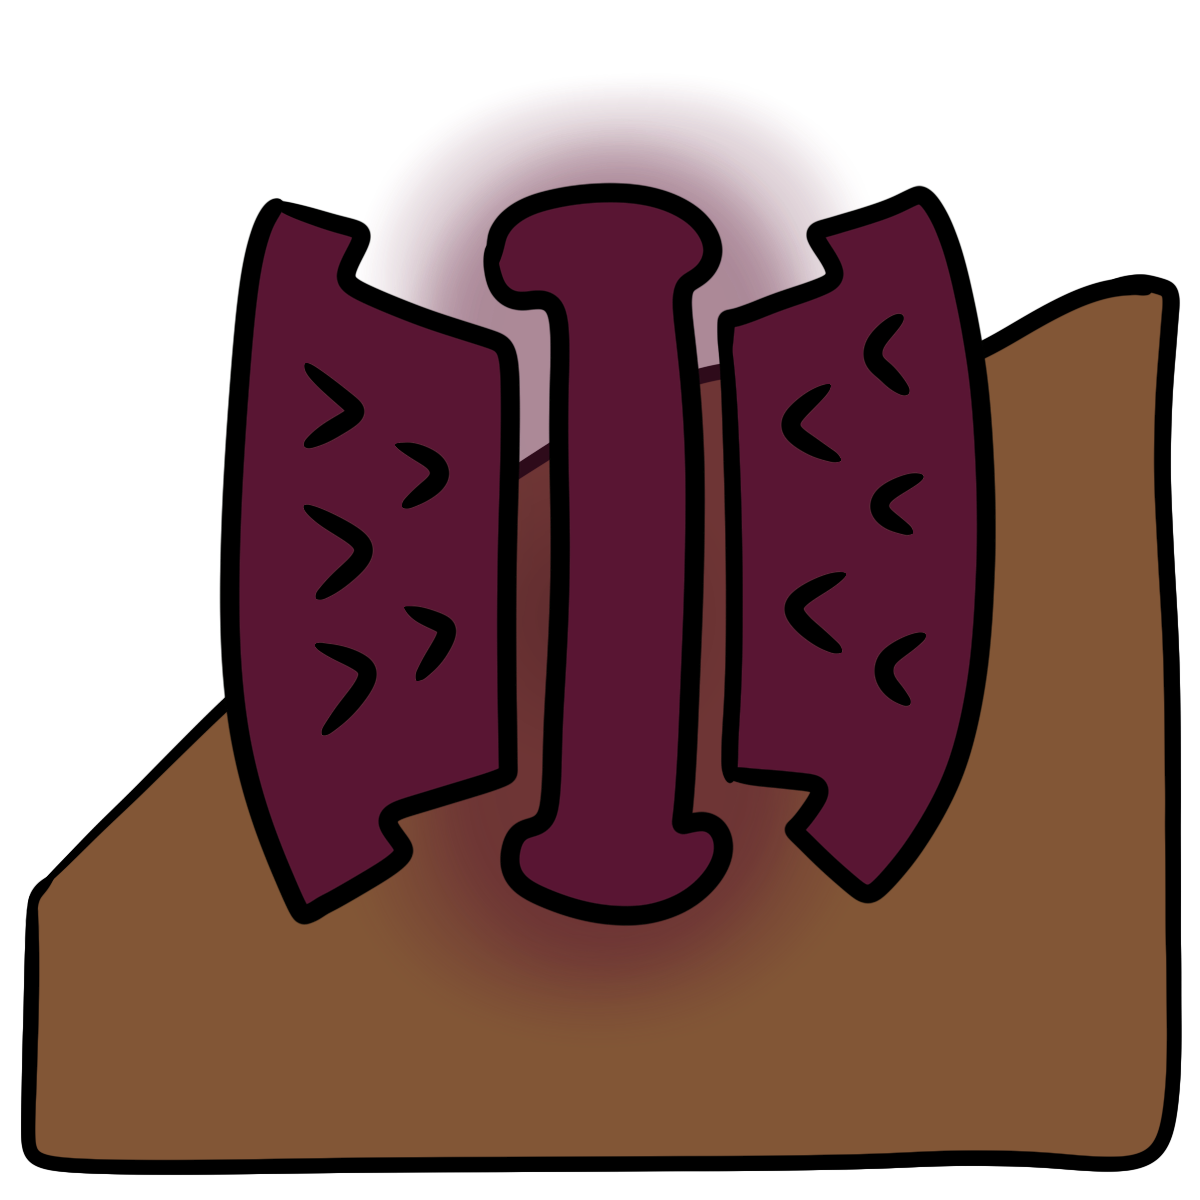 A dark magenta blob squeezed on both sides by anvil shaped blobs with carrot shapes pointing in. Curved medium brown skin fills the bottom half of the background.